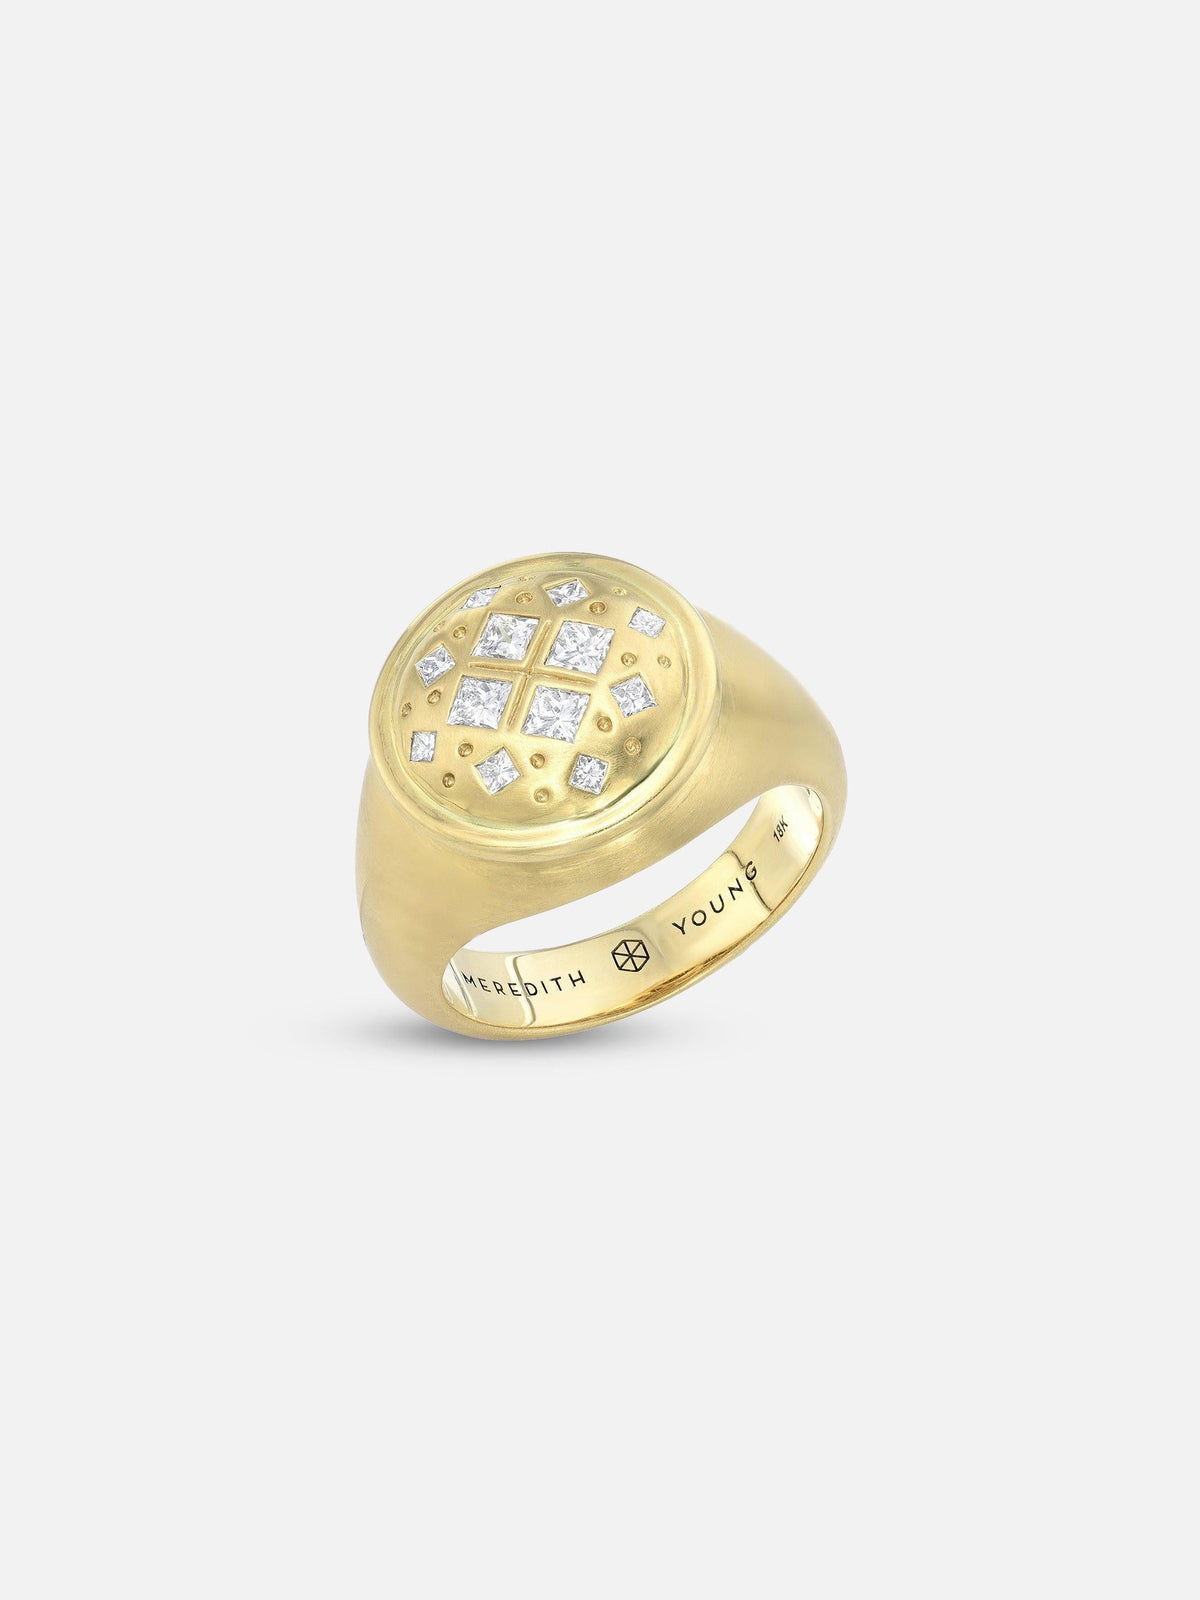 Diamond Pinky Ring - Meredith Young - At Present